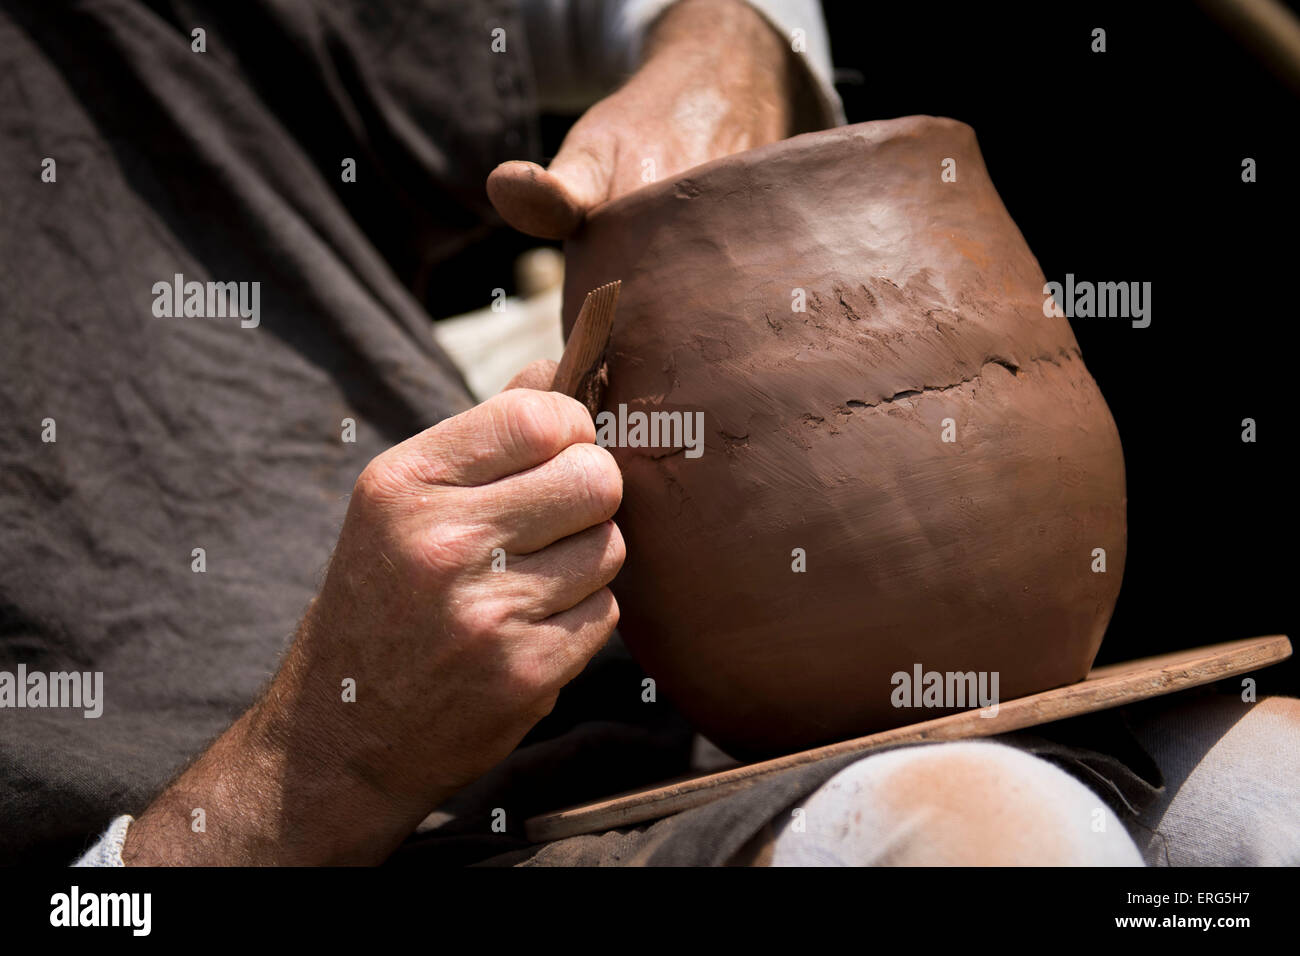 Clay pot making by hand Stock Photo